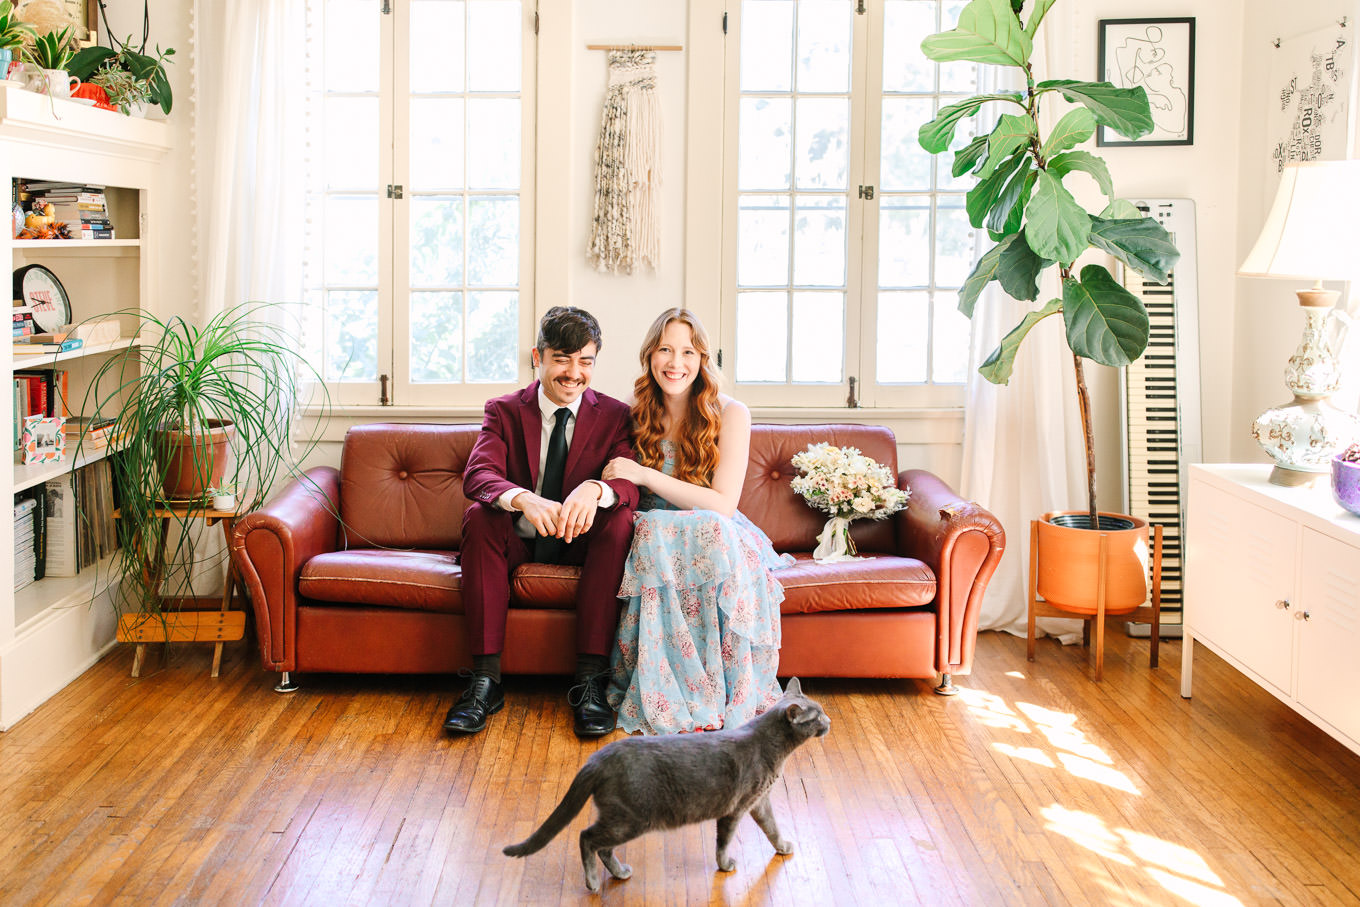 Couple laughing at home with their cat | Los Angeles Arboretum Elopement | Colorful and elevated wedding photography for fun-loving couples in Southern California | #LosAngelesElopement #elopement #LAarboretum #LAskyline #elopementphotos   Source: Mary Costa Photography | Los Angeles